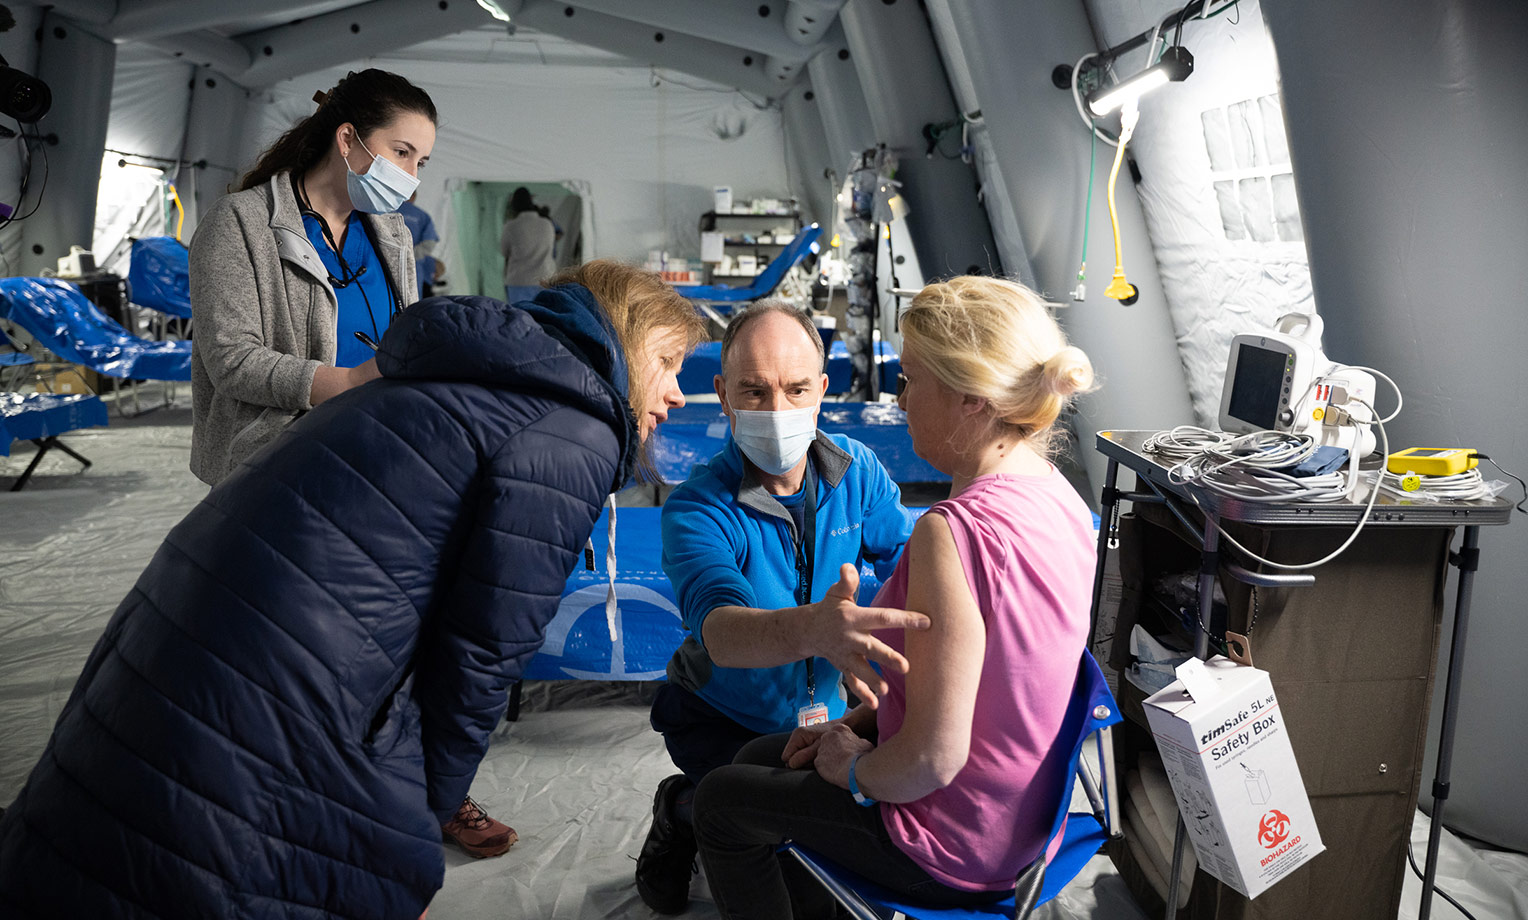 The Emergency Field Hospital is open and receiving patients.